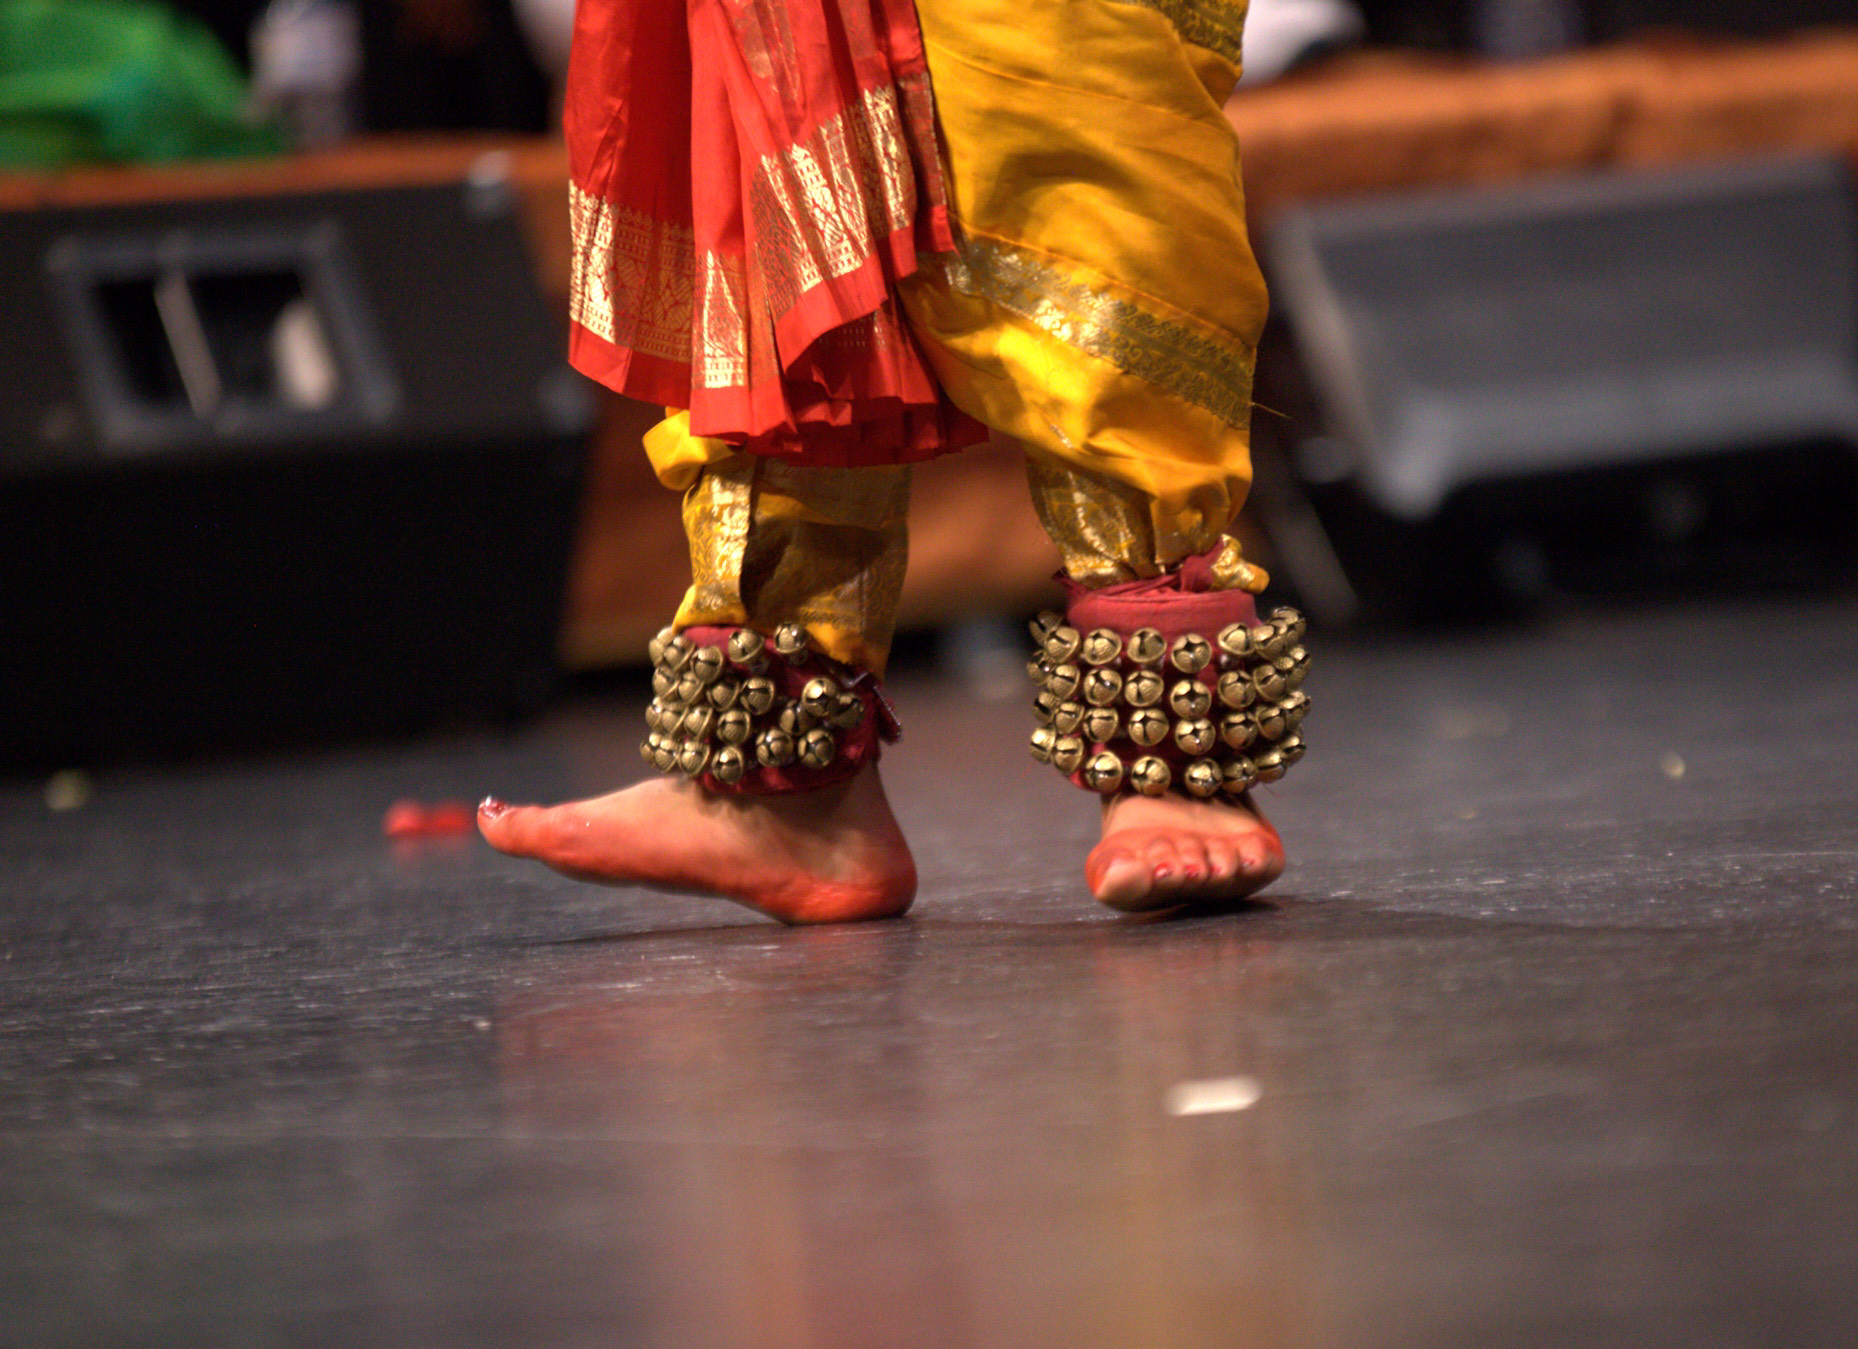 Why I hope we can ring in the next generation of bharatanatyam dancers with a new era of arts journalism